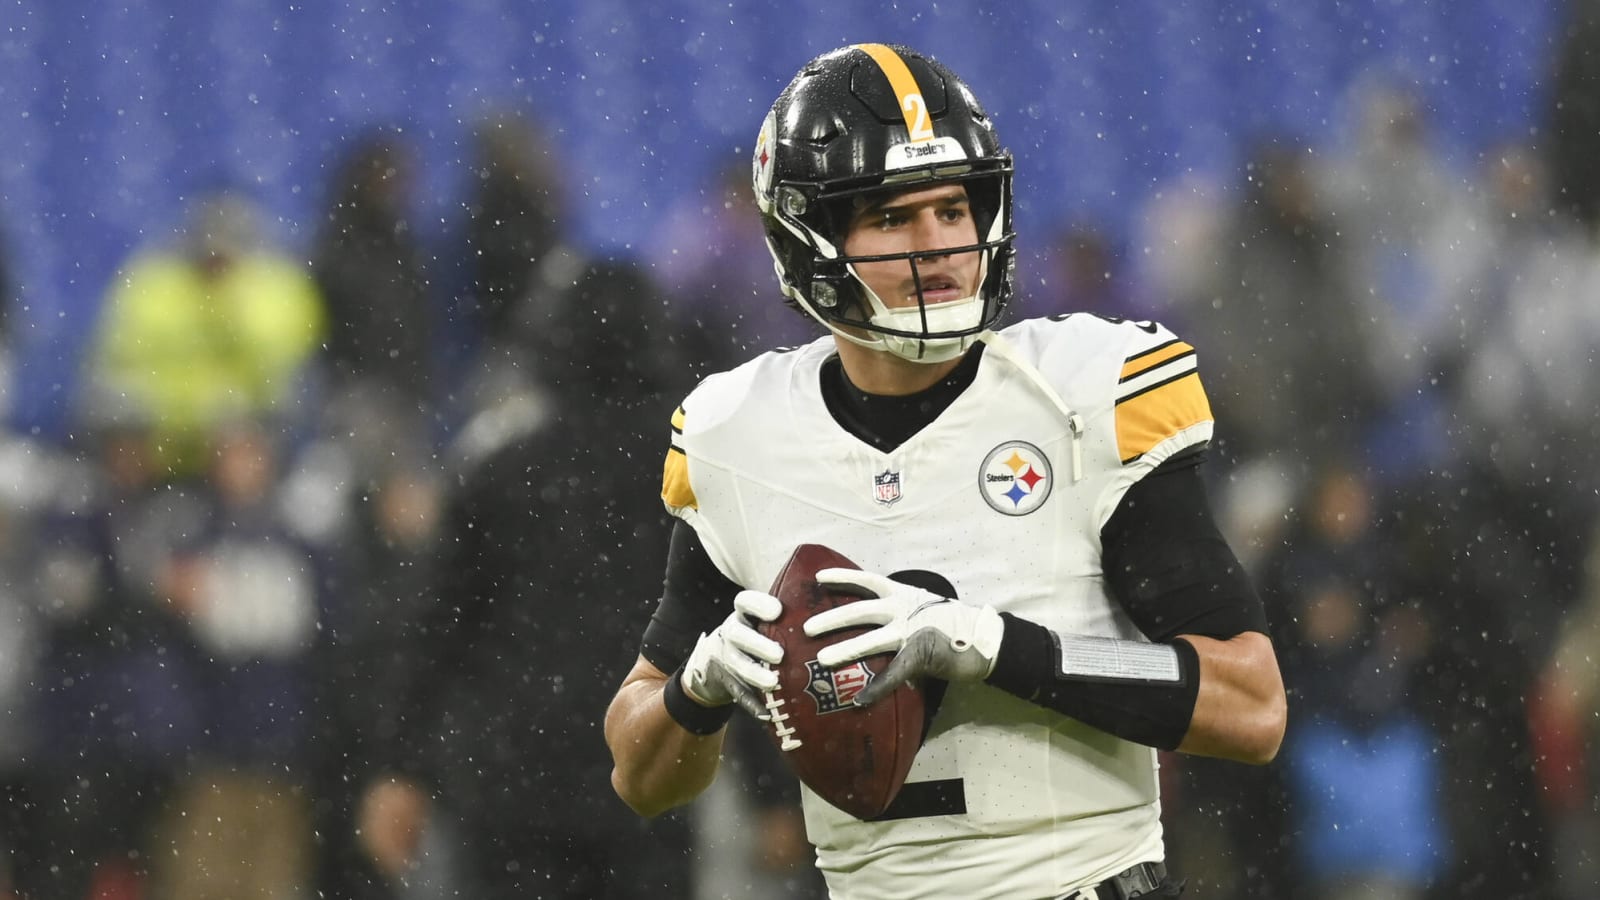 Steelers Failing To List Mason Rudolph As QB1 On The Depth Chart Is Despicable According To Mark Madden